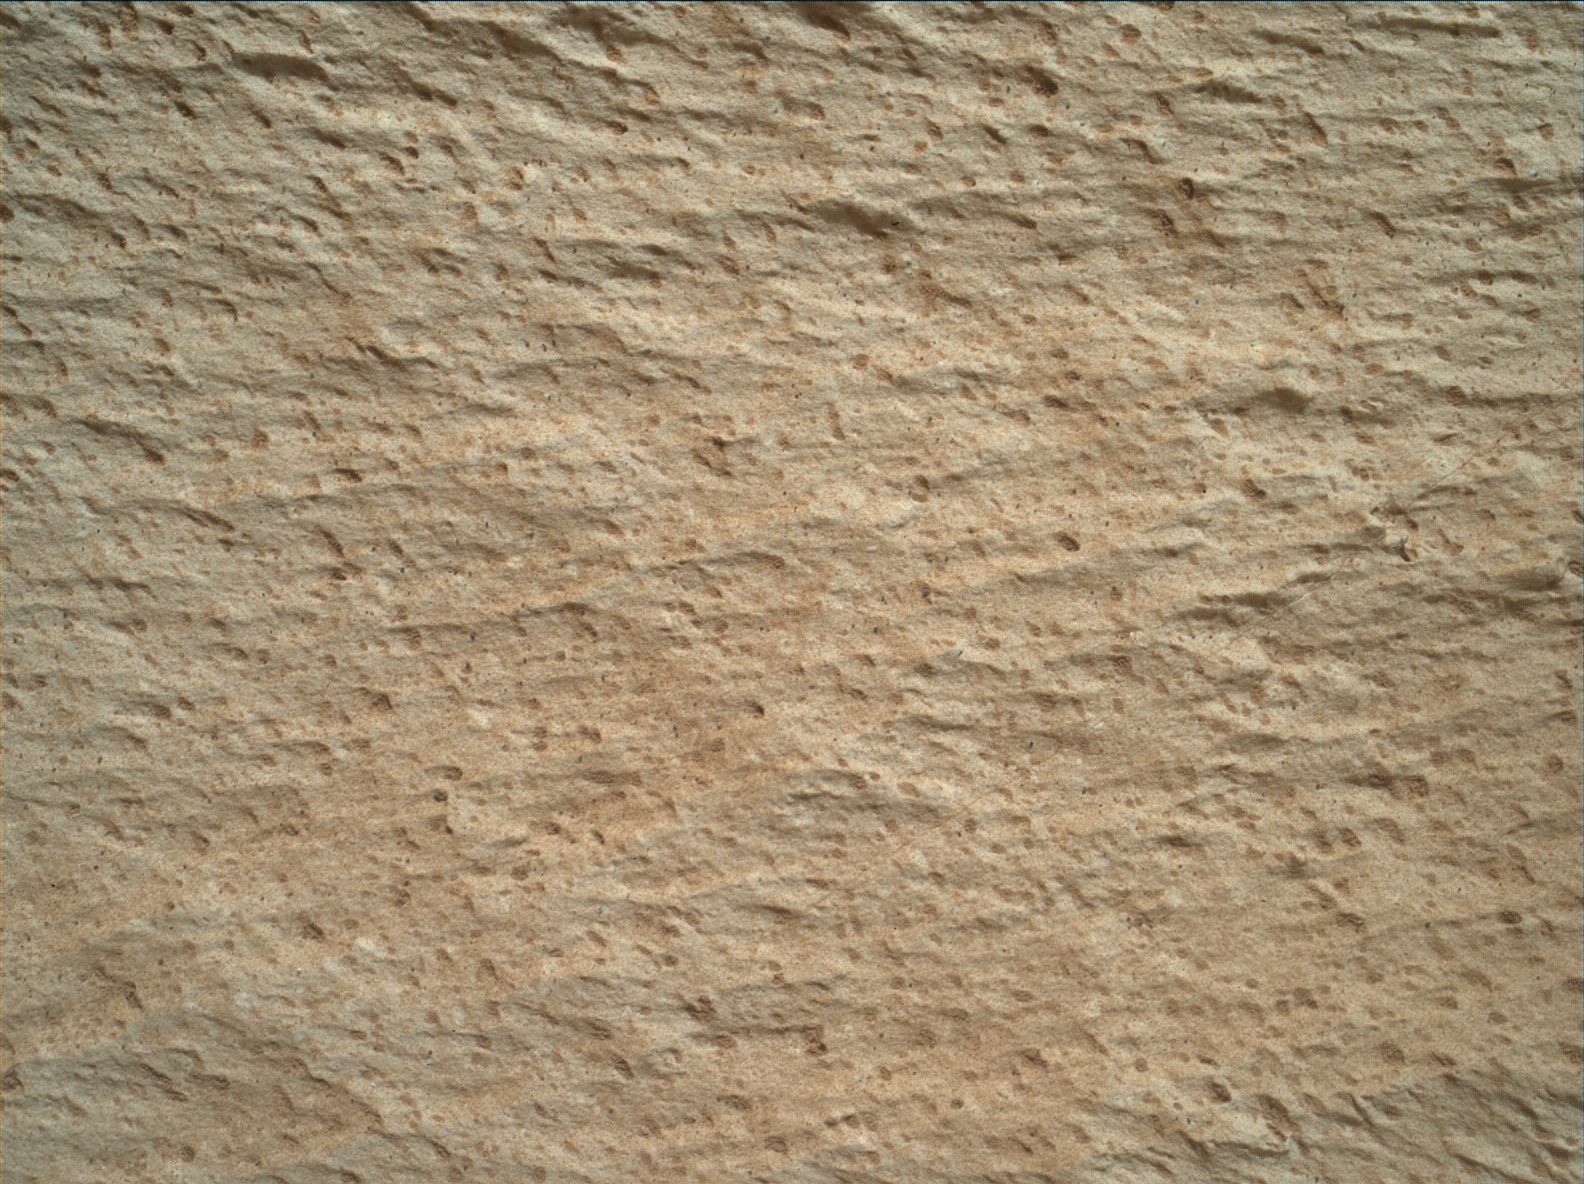 Nasa's Mars rover Curiosity acquired this image using its Mars Hand Lens Imager (MAHLI) on Sol 1041